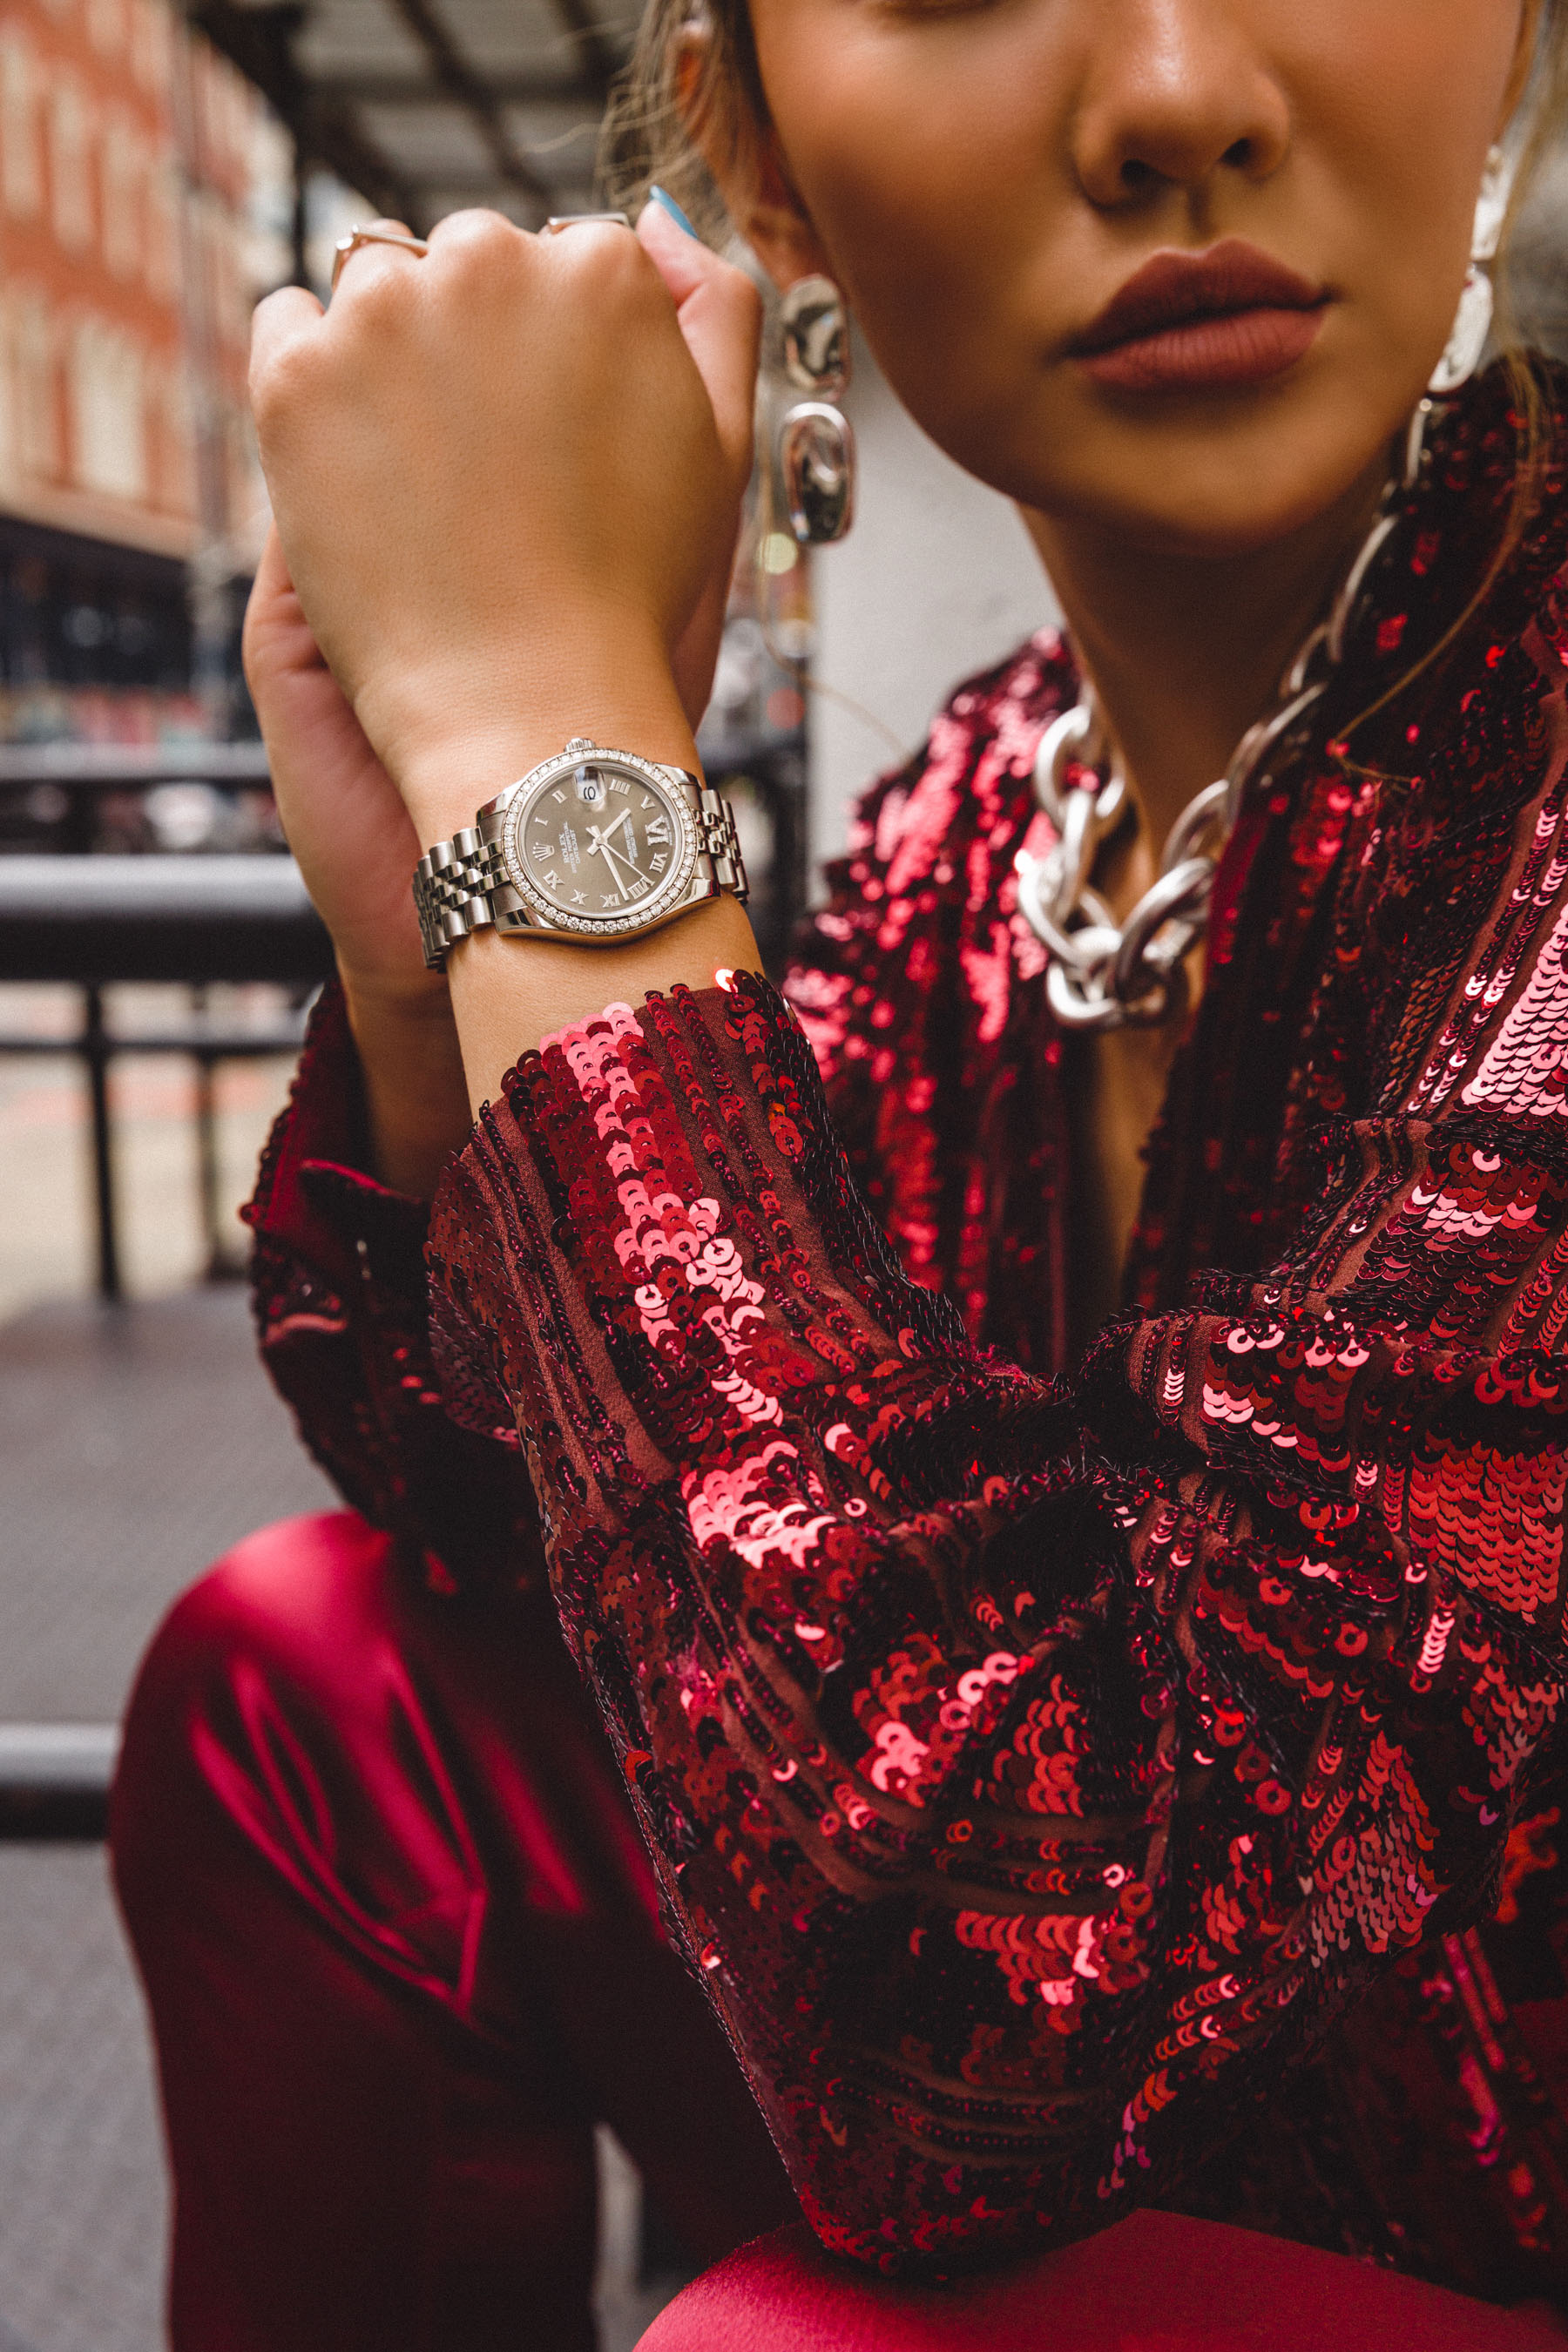 reasons to buy a luxury watch, rolex watch, red sequin top, nyfw street style // Notjessfashion.com